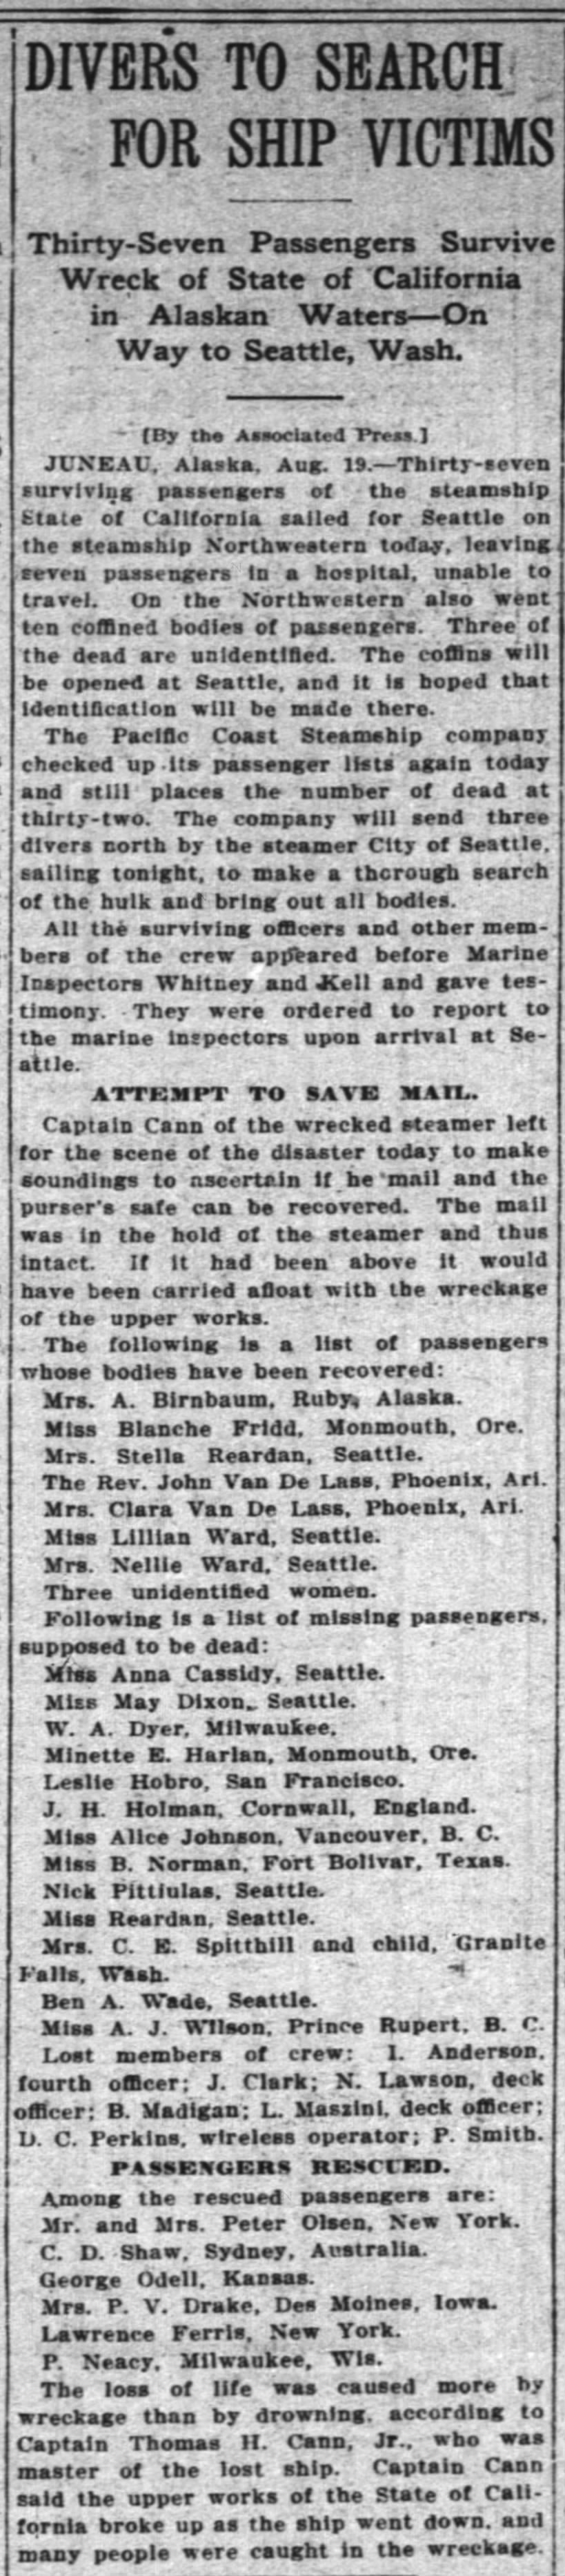 The Inter Ocean
Chicago, Illinois
Wednesday, August 20, 1913